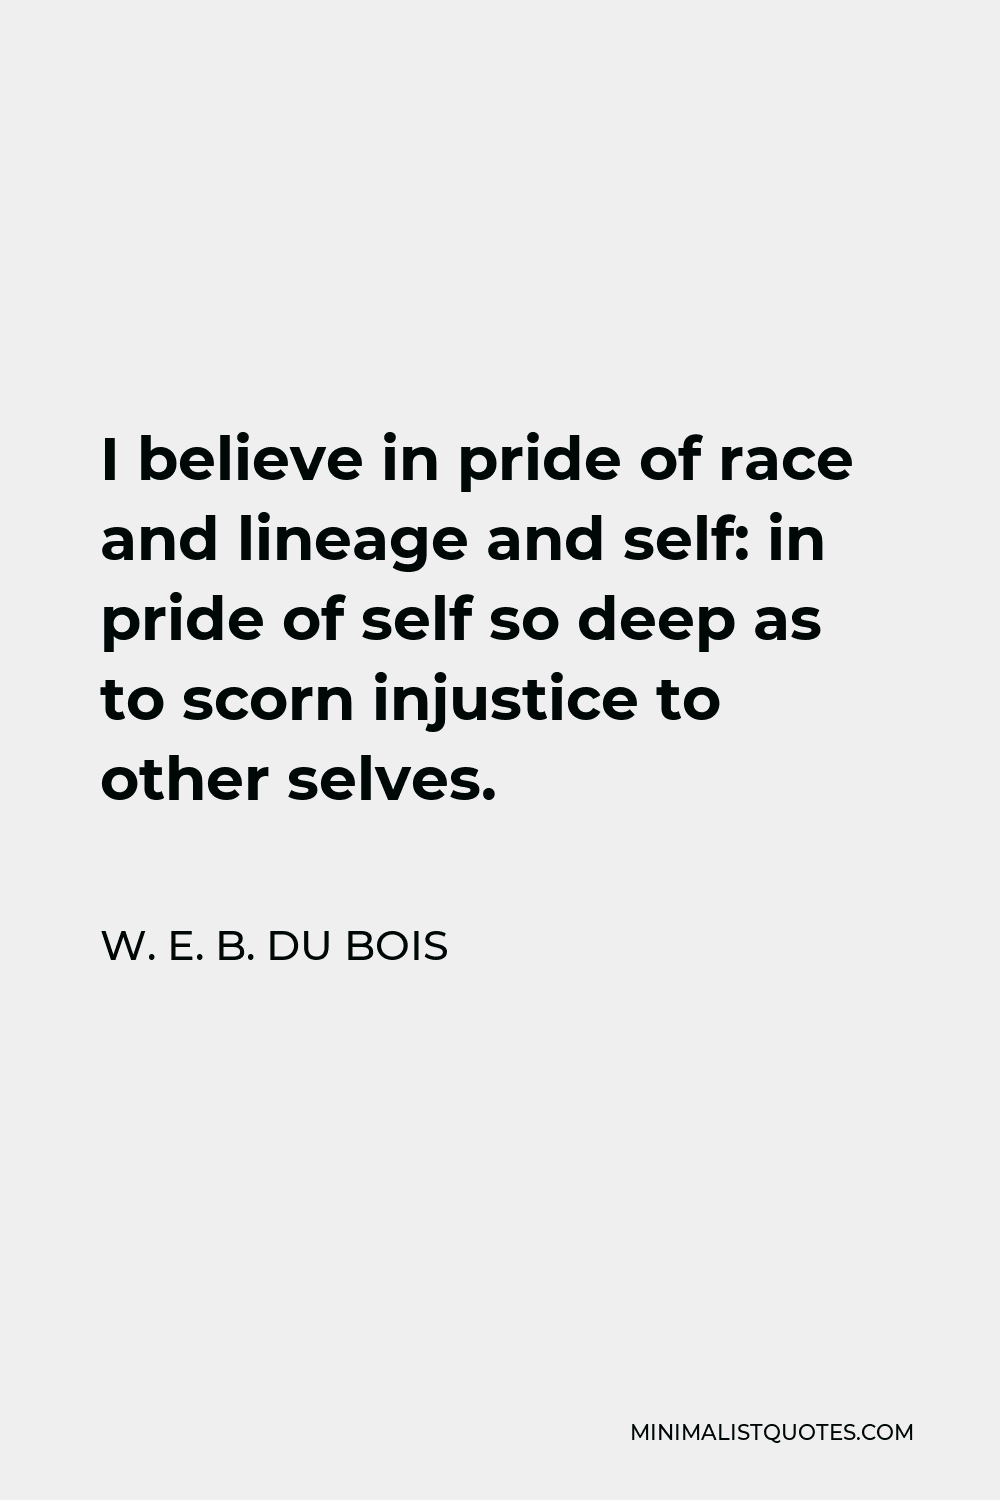 W. E. B. Du Bois Quote - I believe in pride of race and lineage and self: in pride of self so deep as to scorn injustice to other selves.